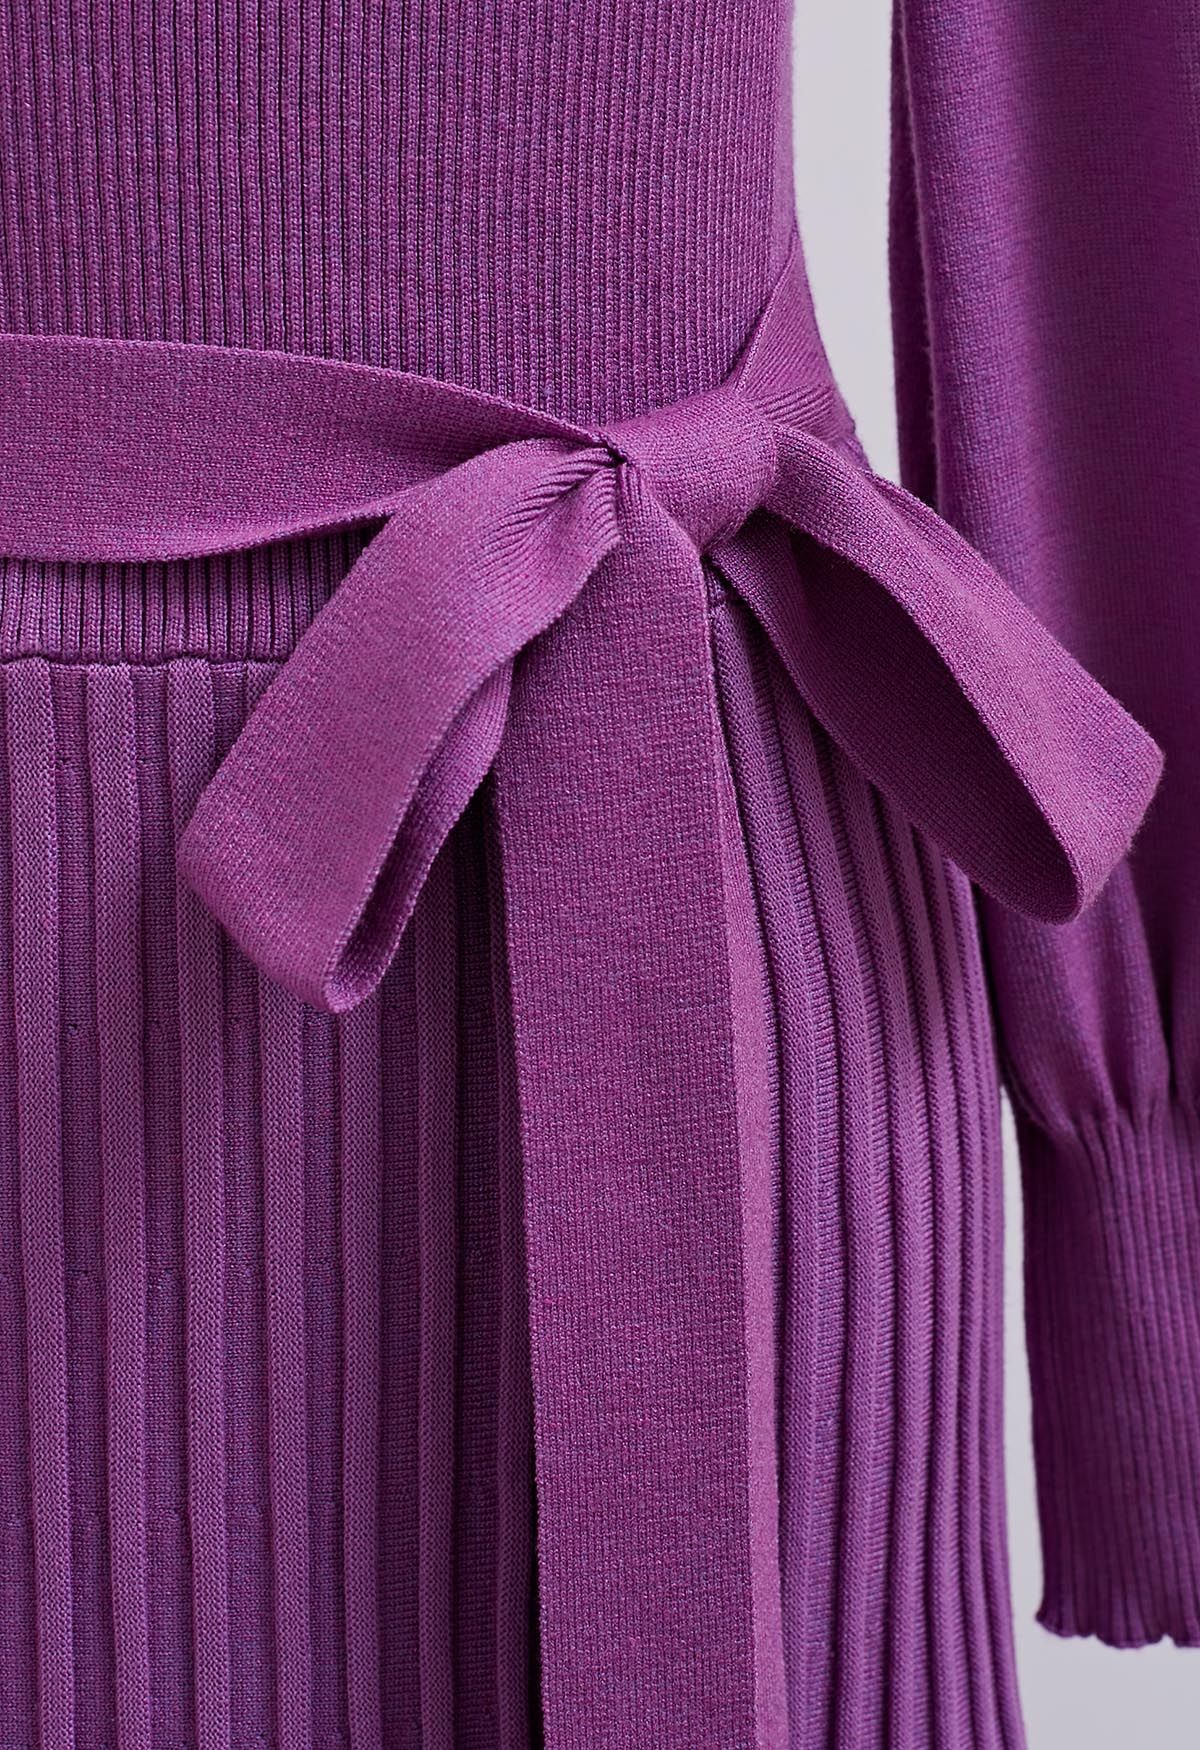 Captivating V-Neck Tie Waist Pleated Knit Dress in Purple